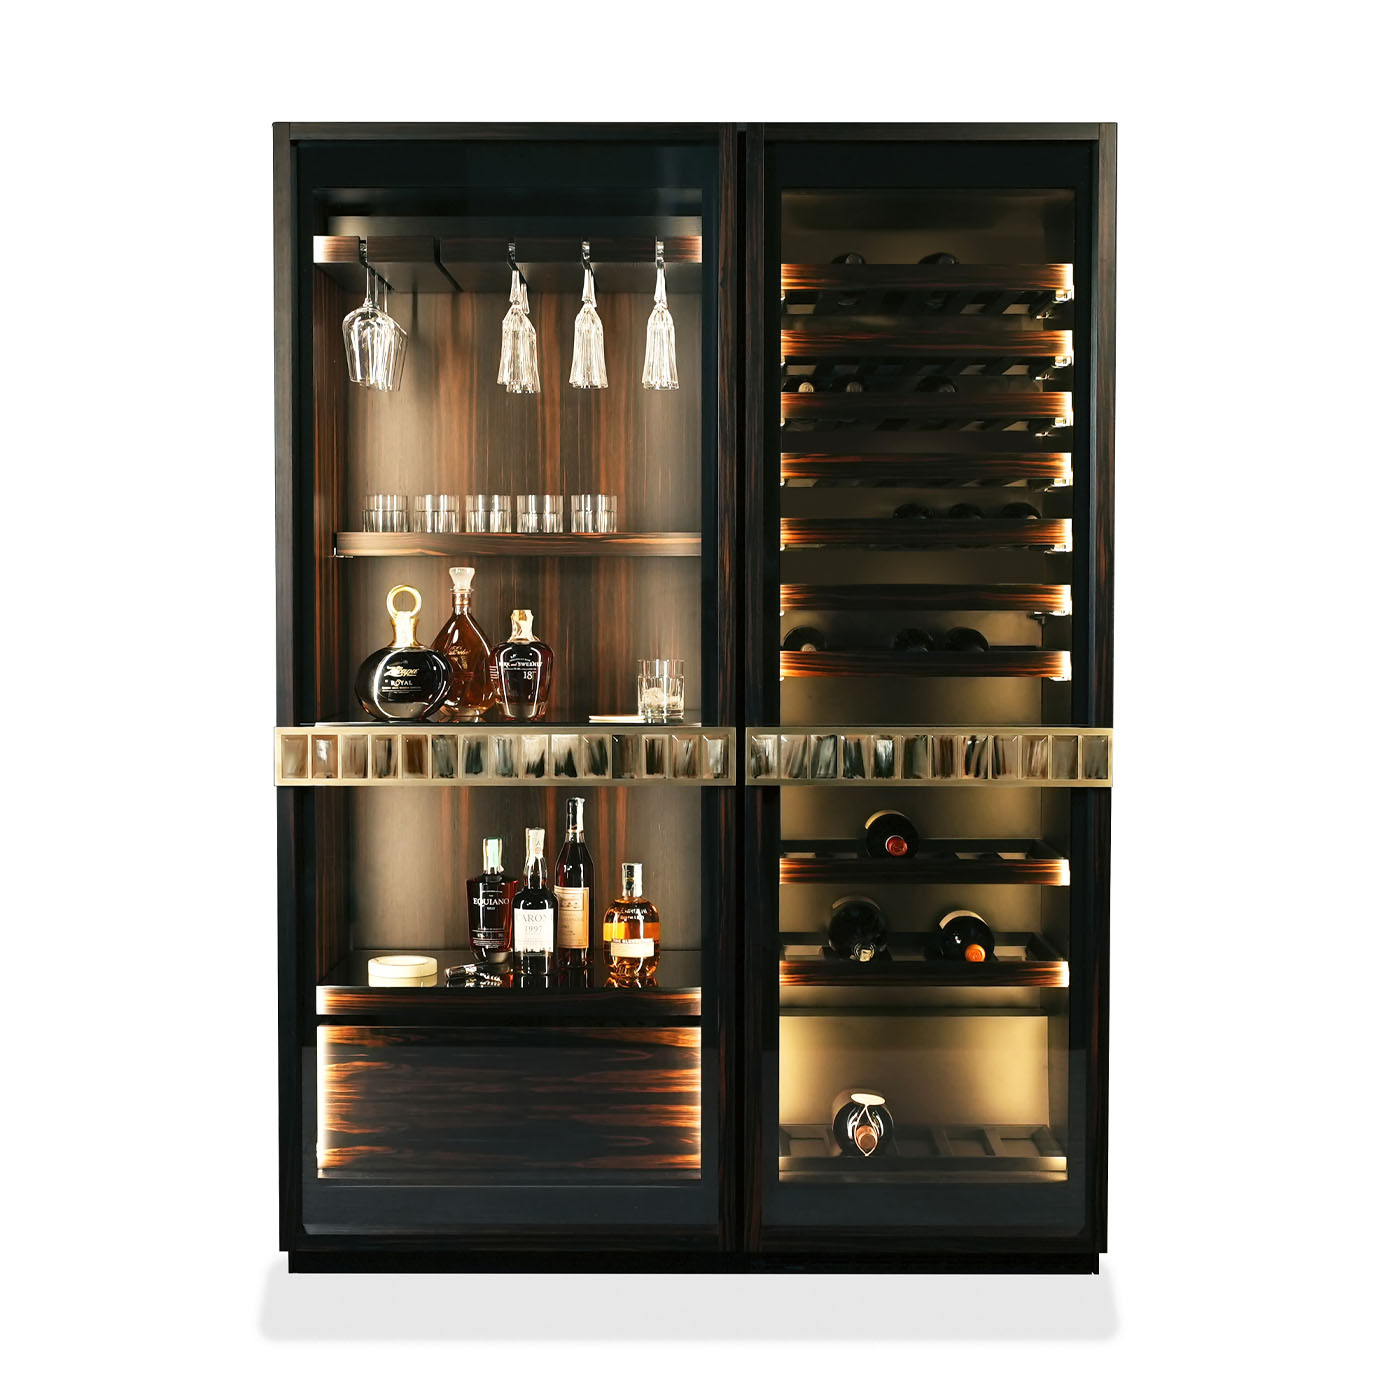 Cabinets and bookcases - Manhattan wine cellar in horn and Makassar ebony veneer 4450 - Arcahorn